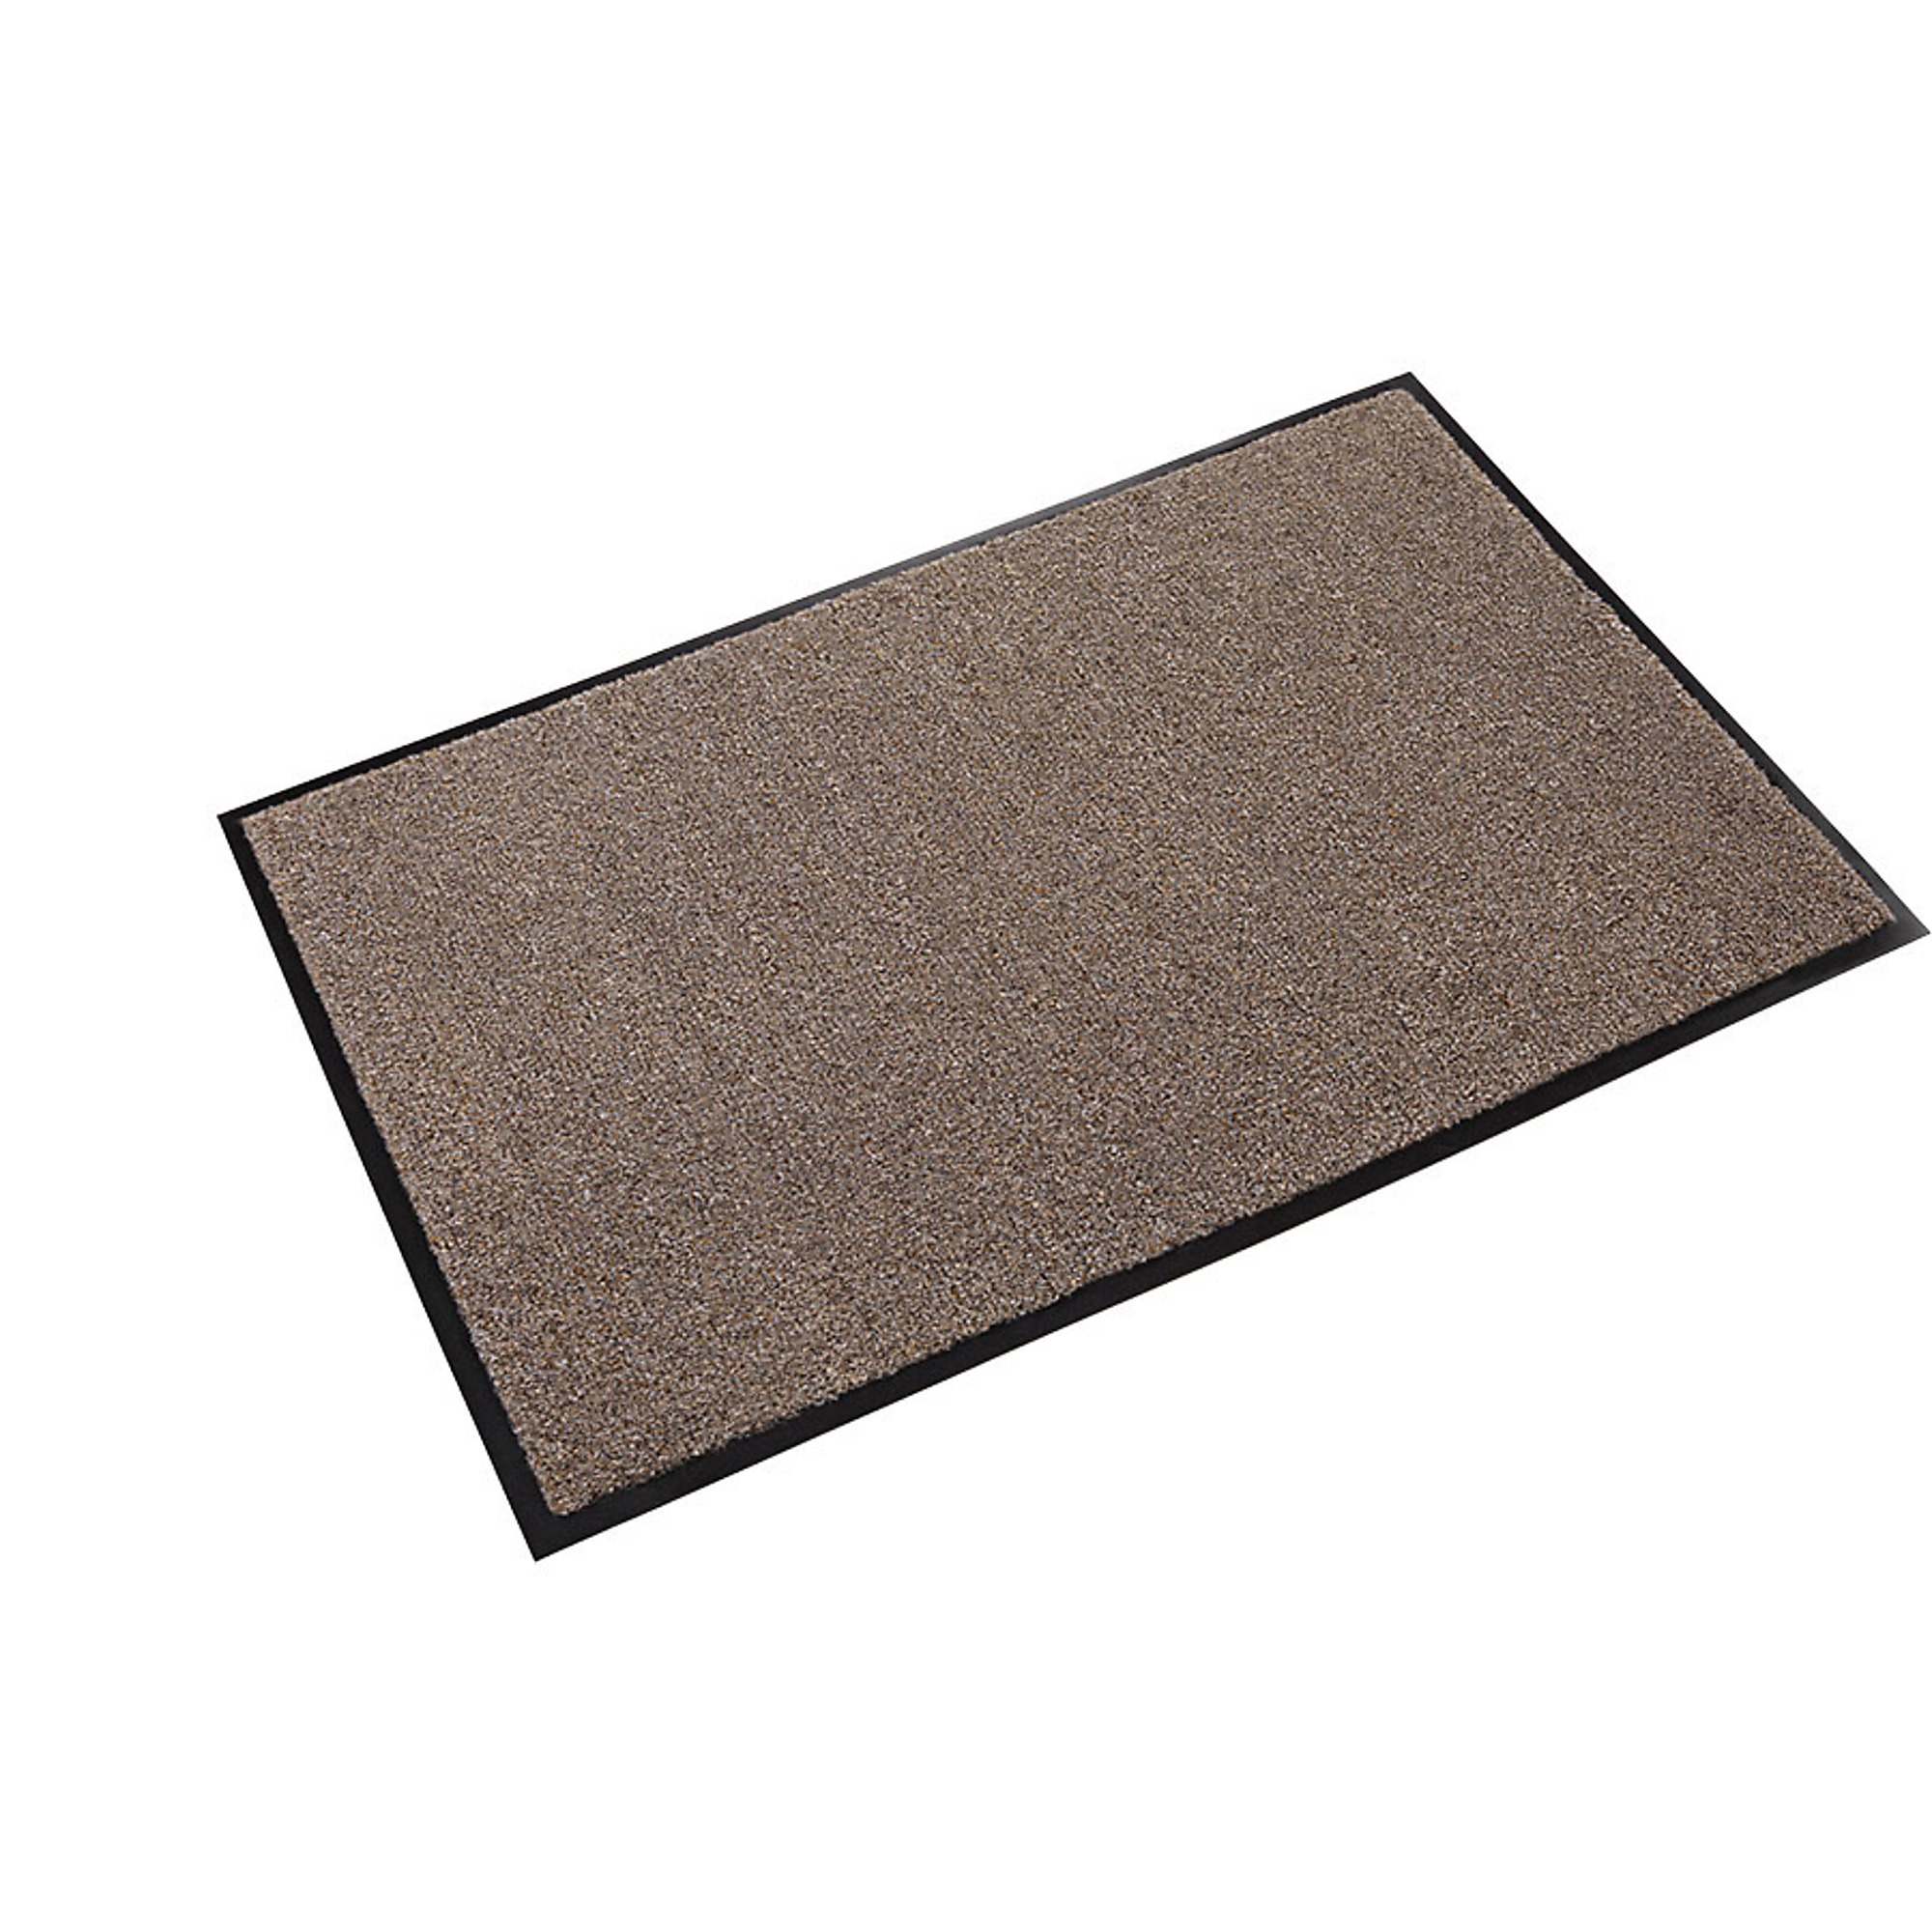 Crown Matting Technologies, Rely-On Olefin 3ft.x10ft. Pebble Brown, Width 36 in, Length 120 in, Thickness 3/8 in, Model GS 0310PB